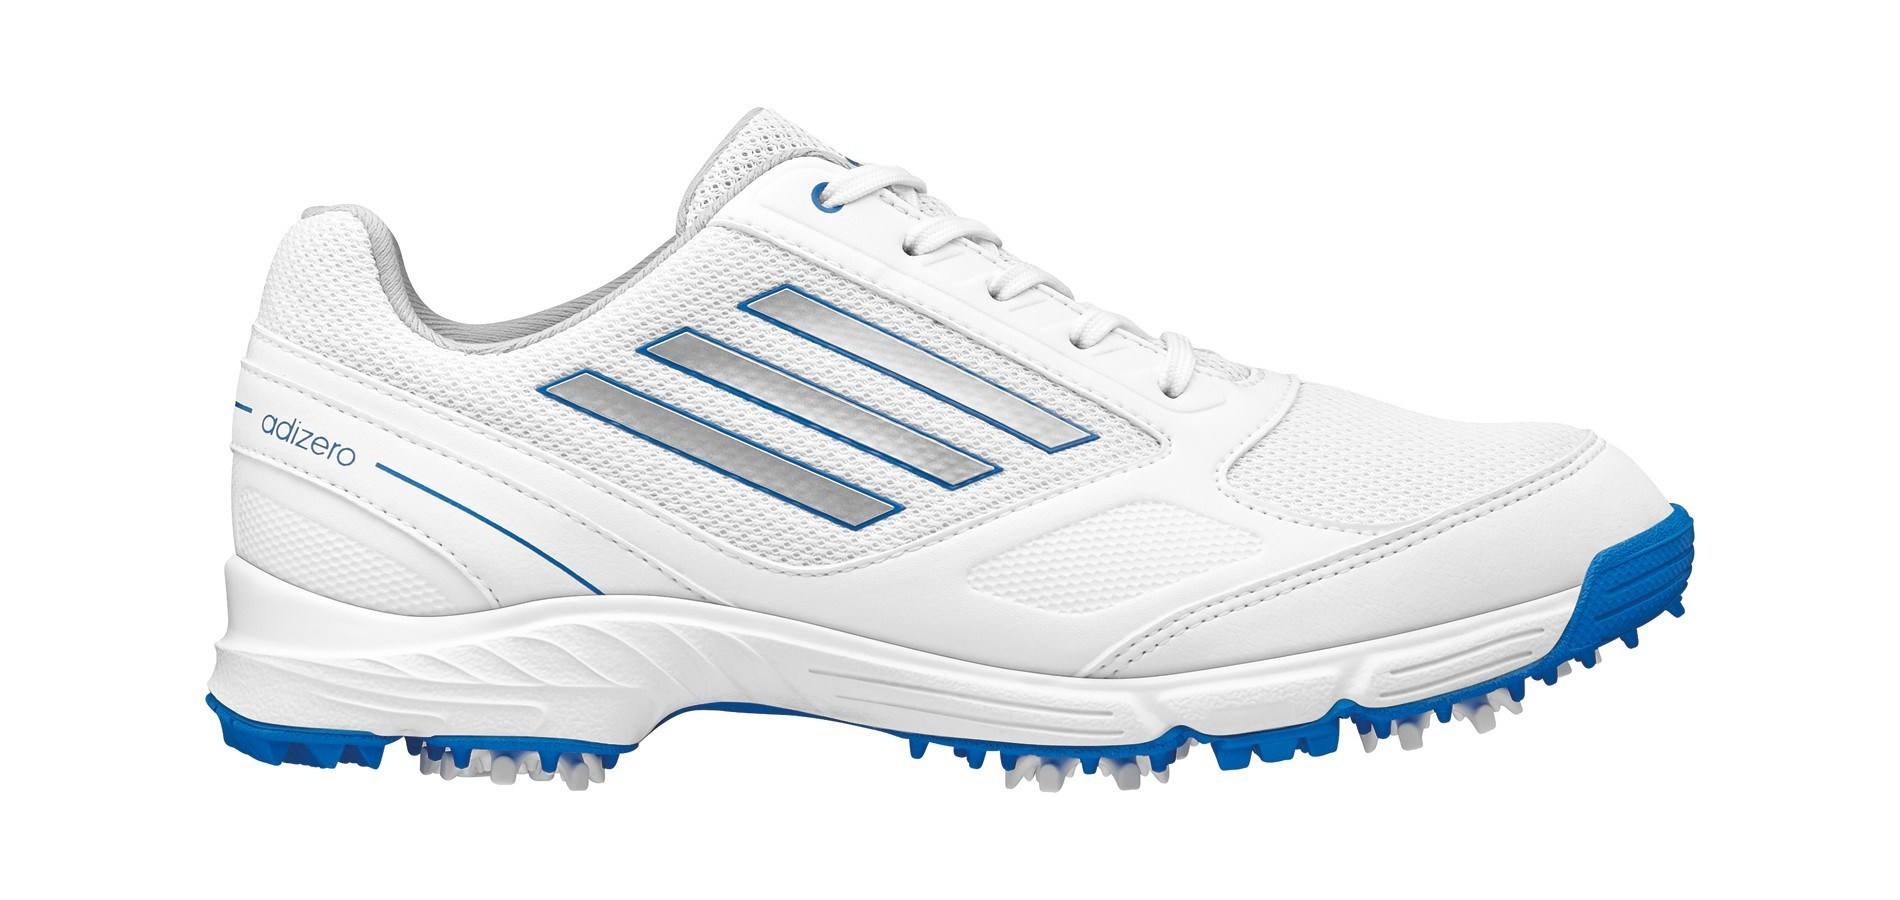 Best junior golf shoes for boys and girls kids and teens